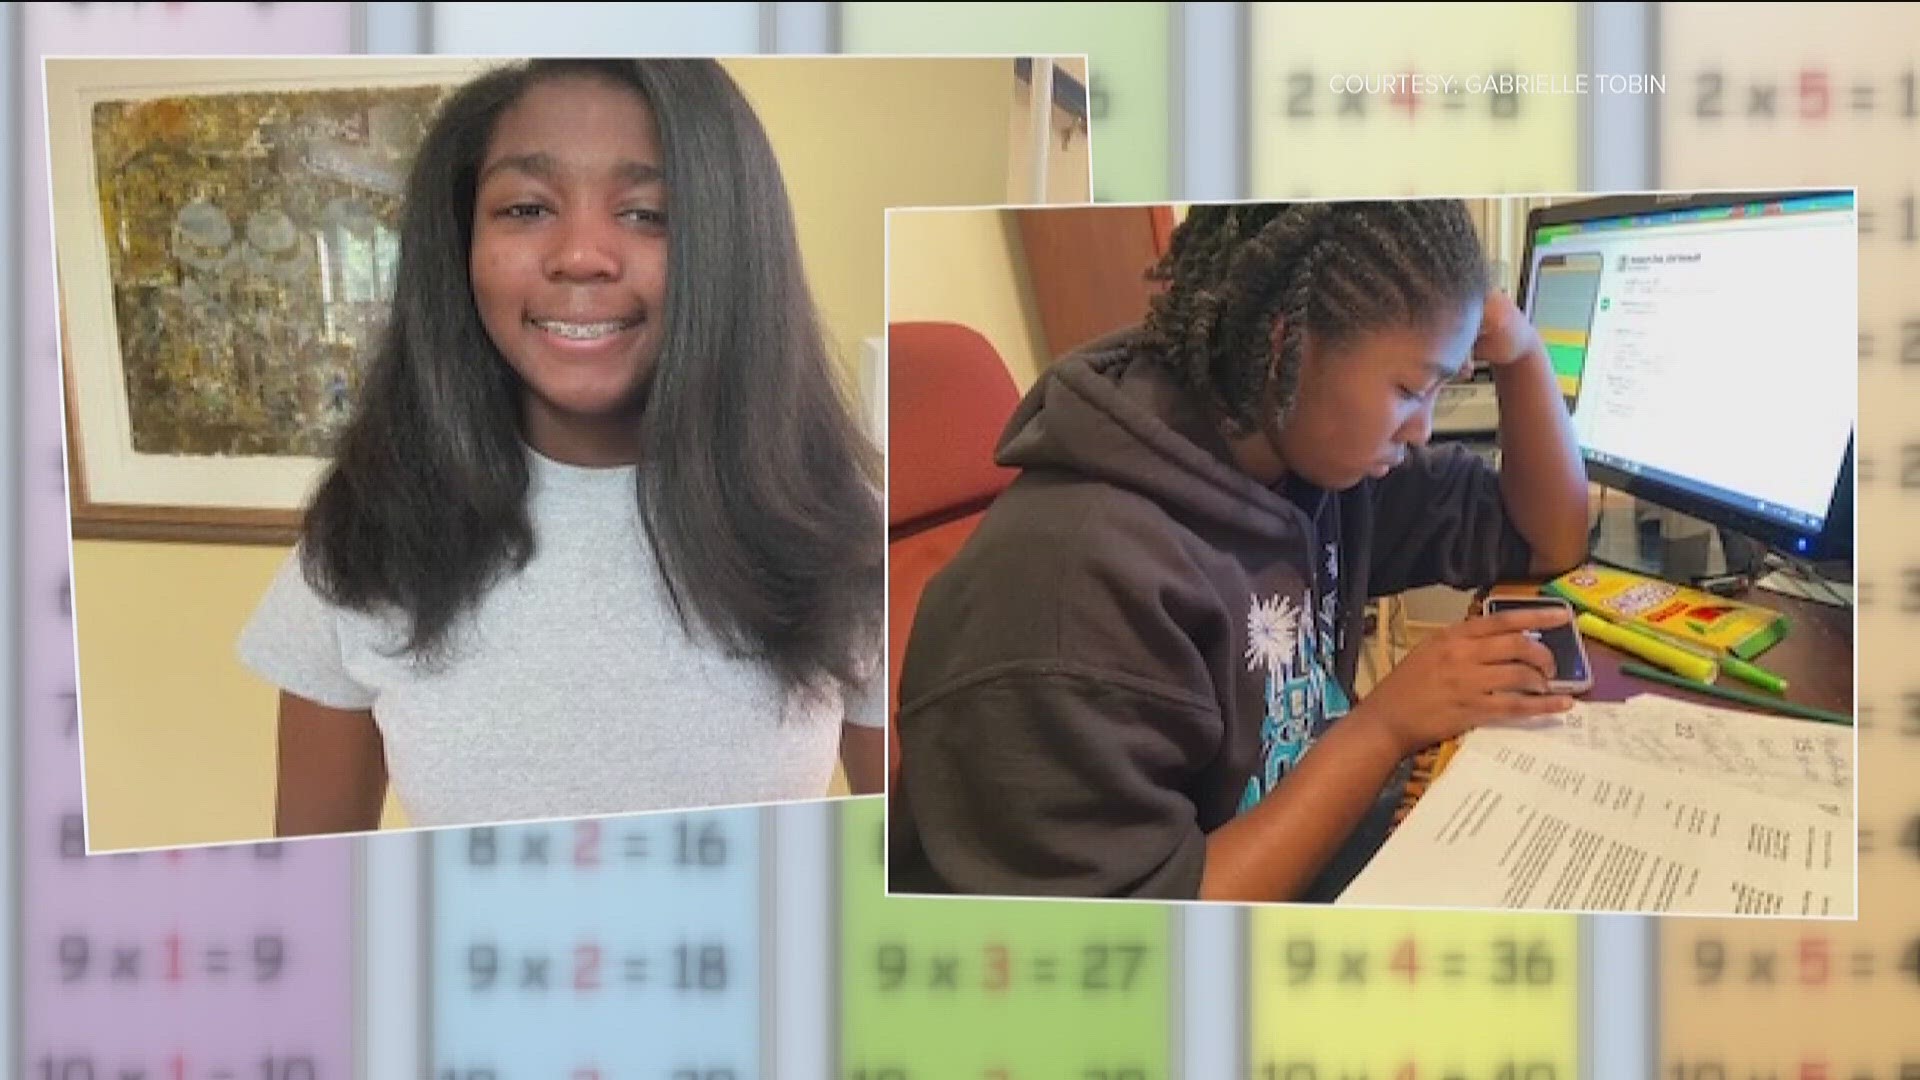 For some metro Atlanta students, time in the classroom never really ended.